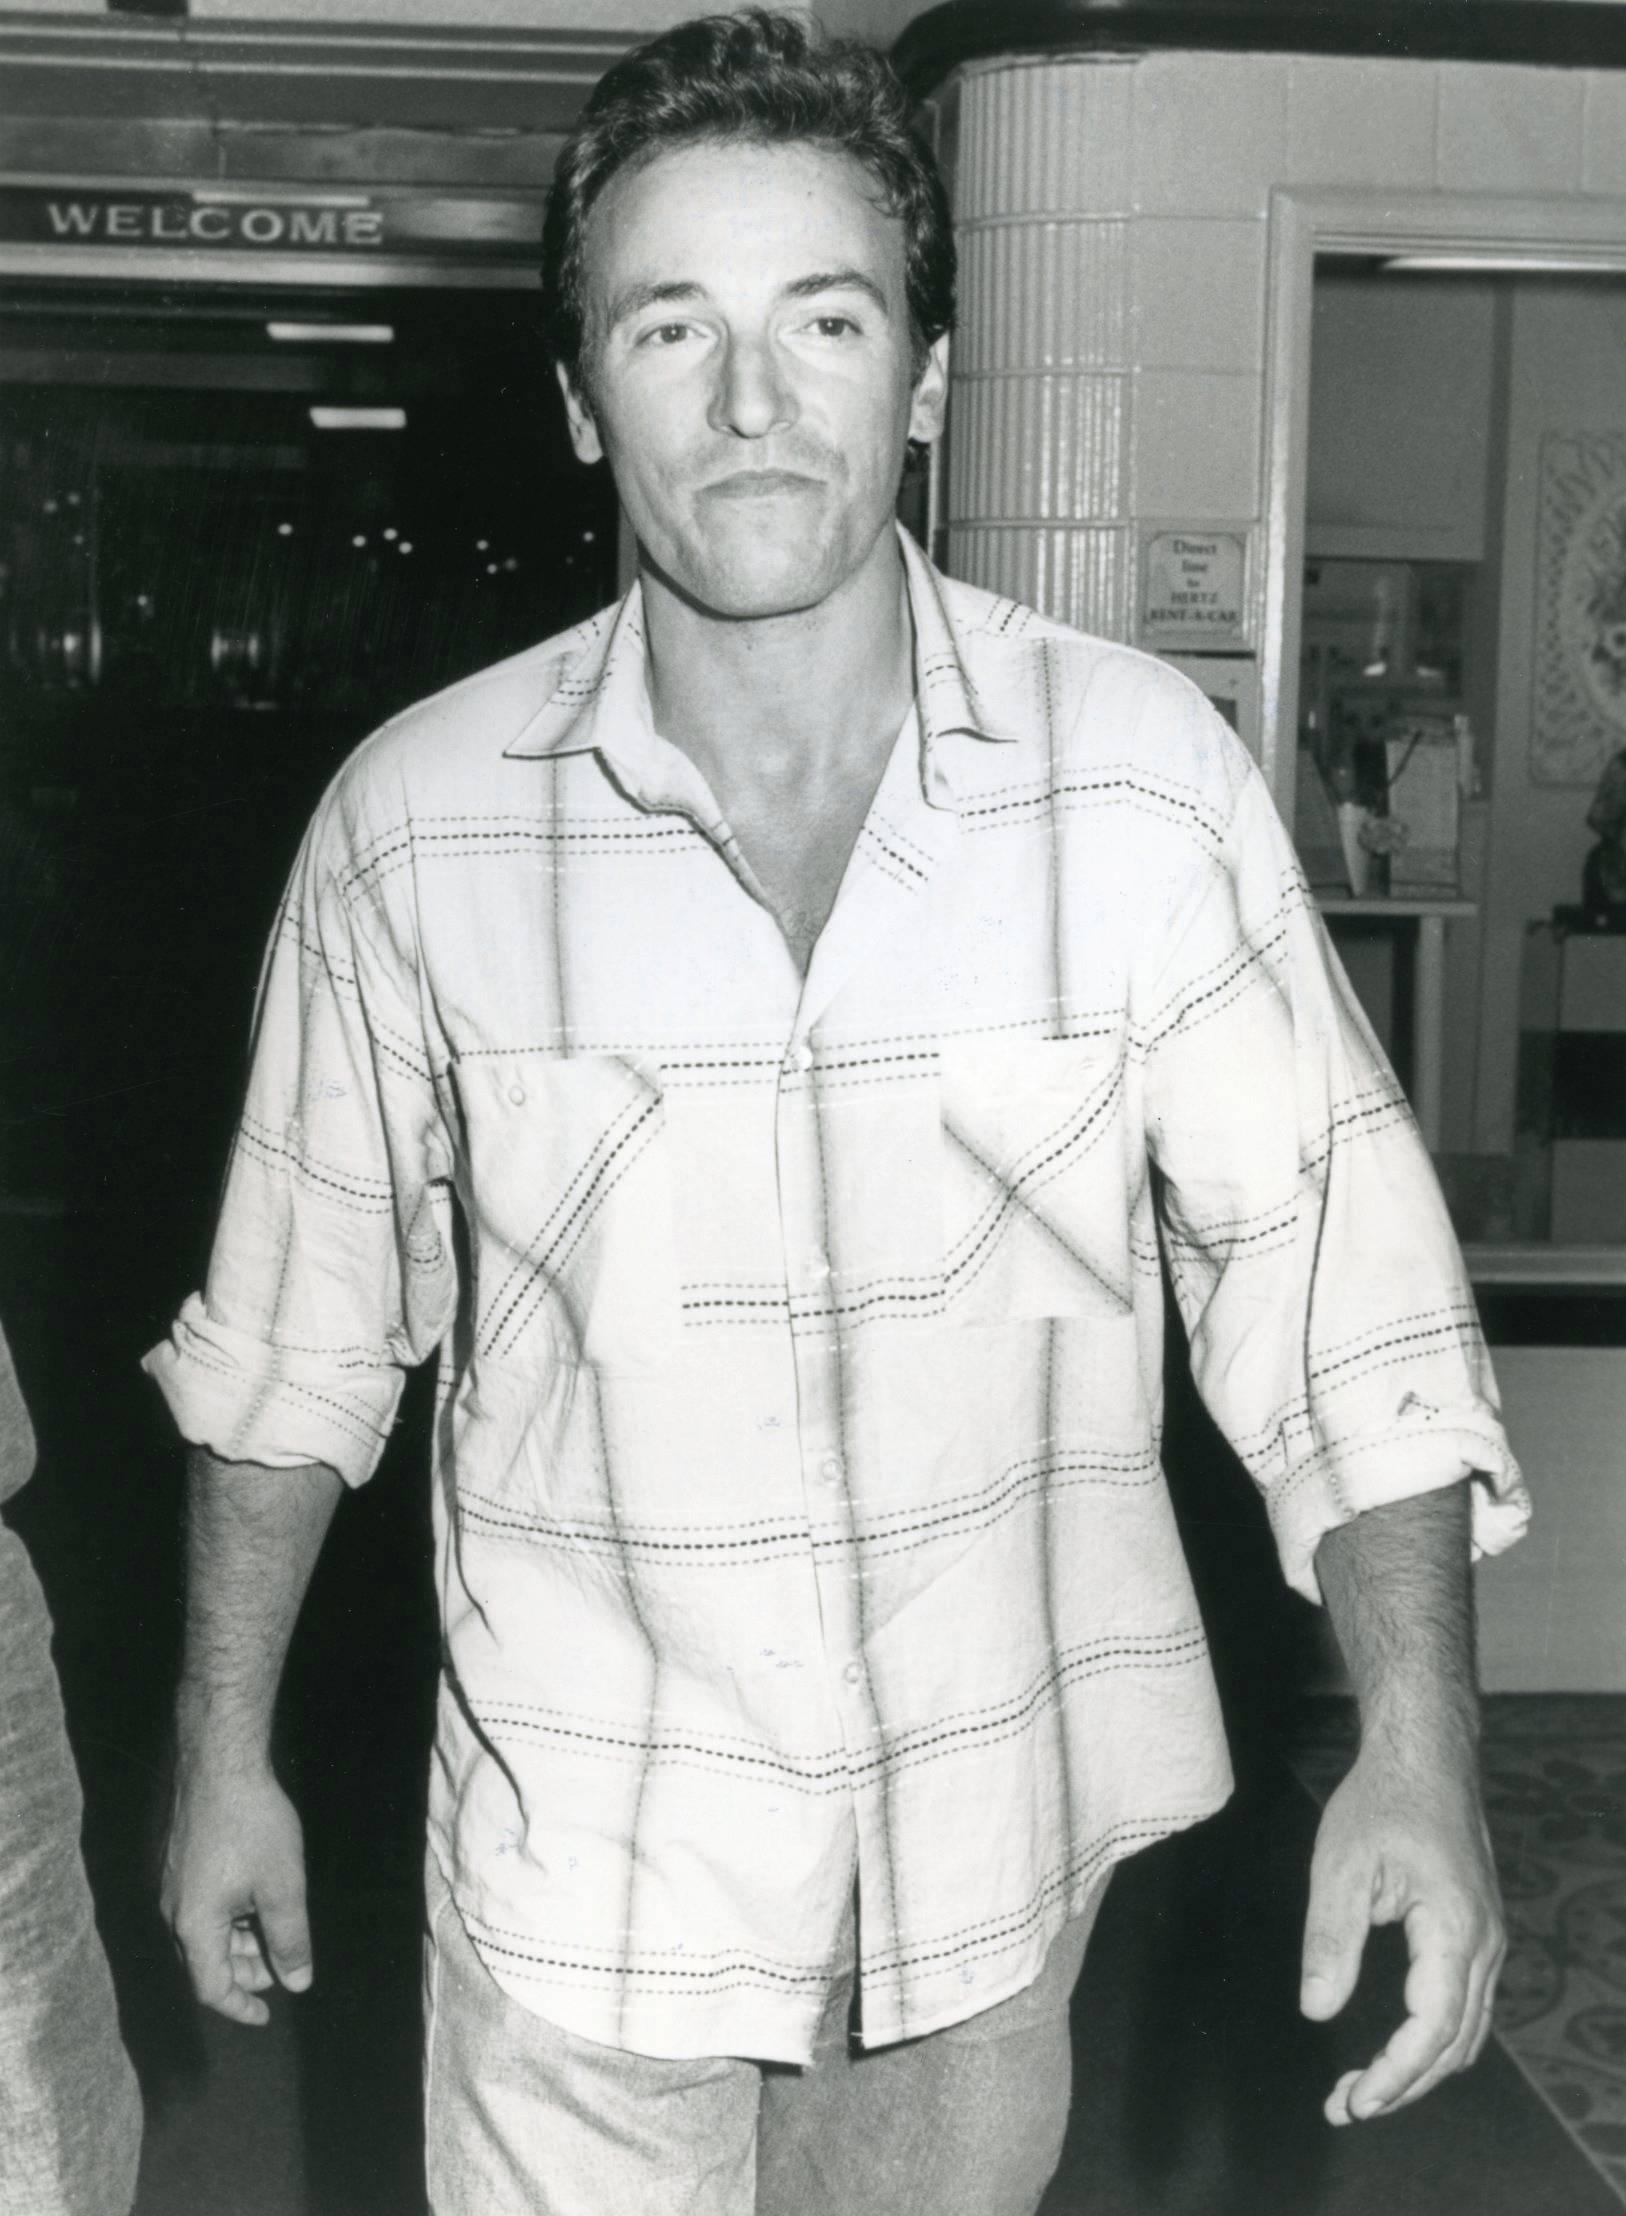 Unknown Black and White Photograph - Candid Bruce Springsteen Vintage Original Photograph